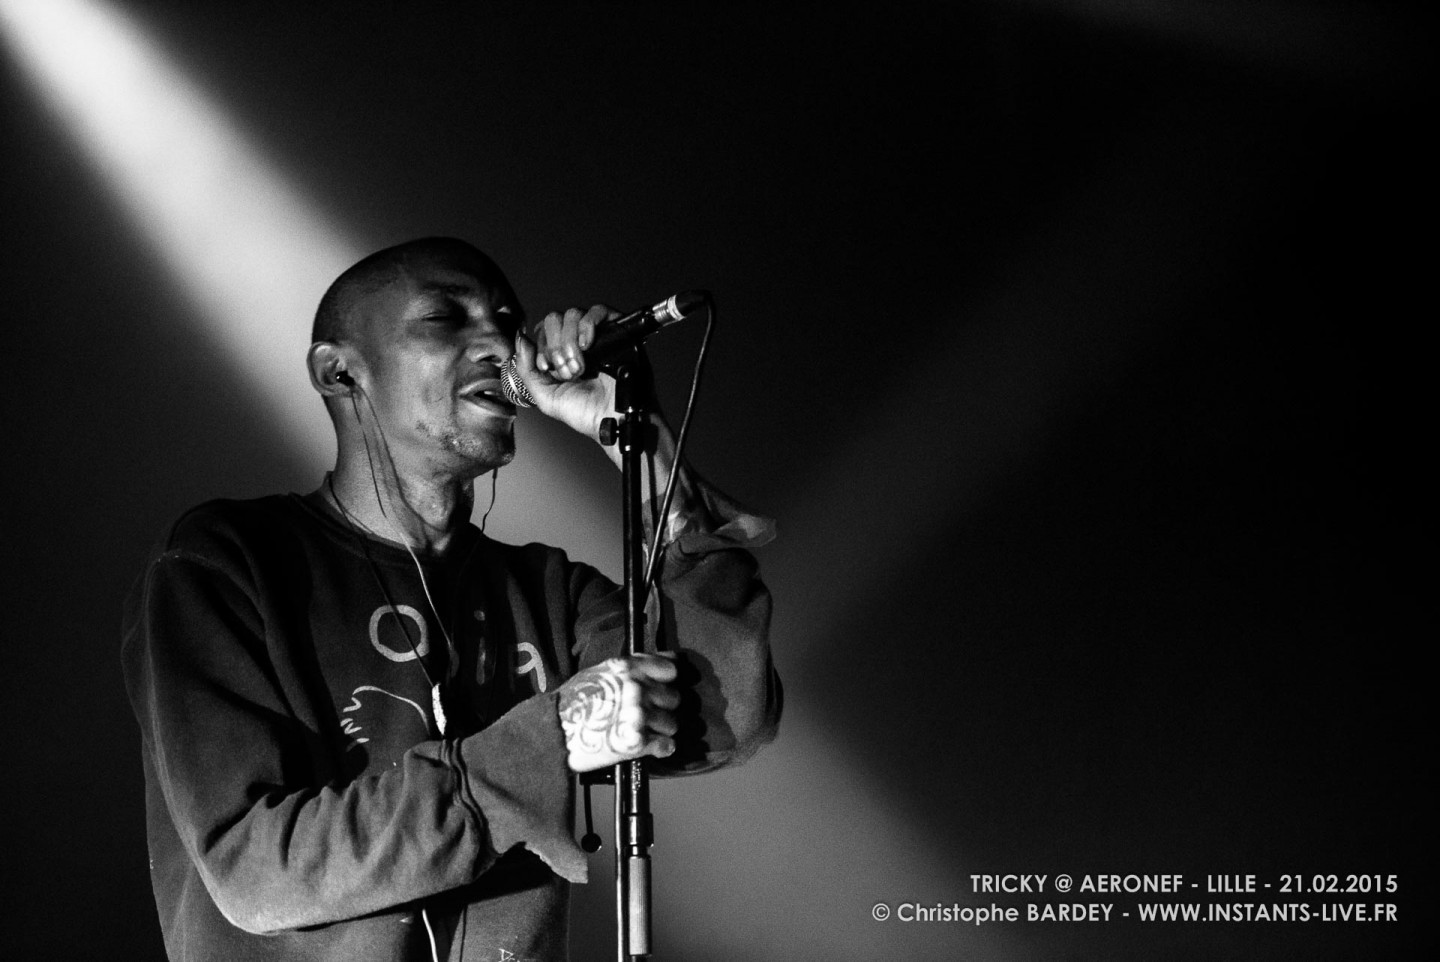 TRICKY - Concert @ Aéronef 2015